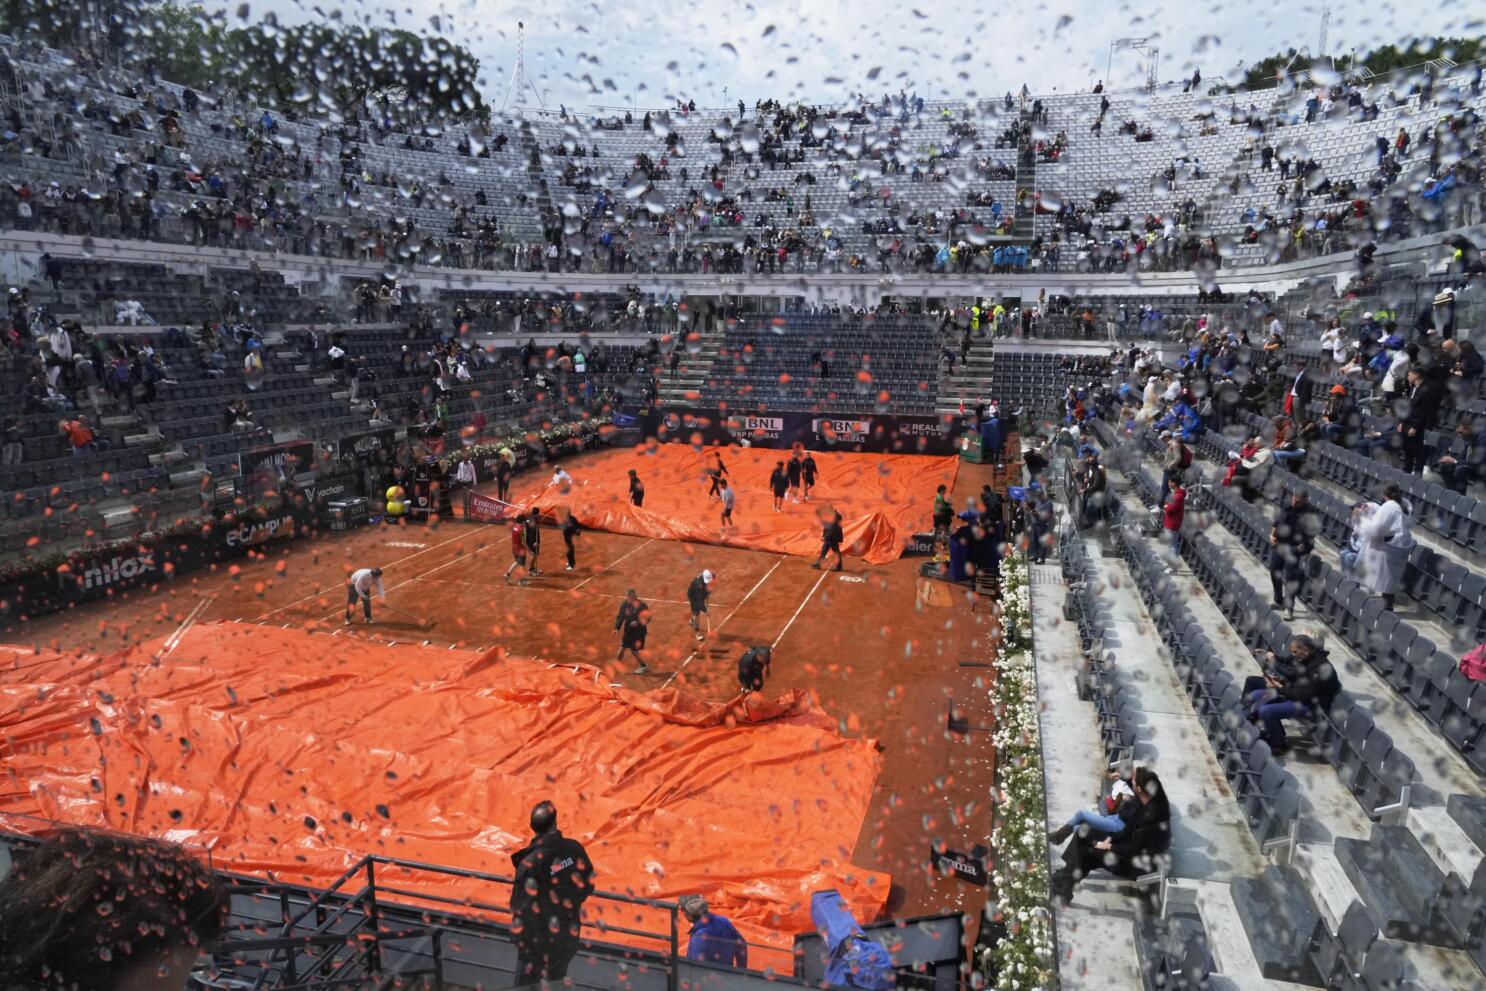 Italian Open organizers promise a retractable roof over the tennis